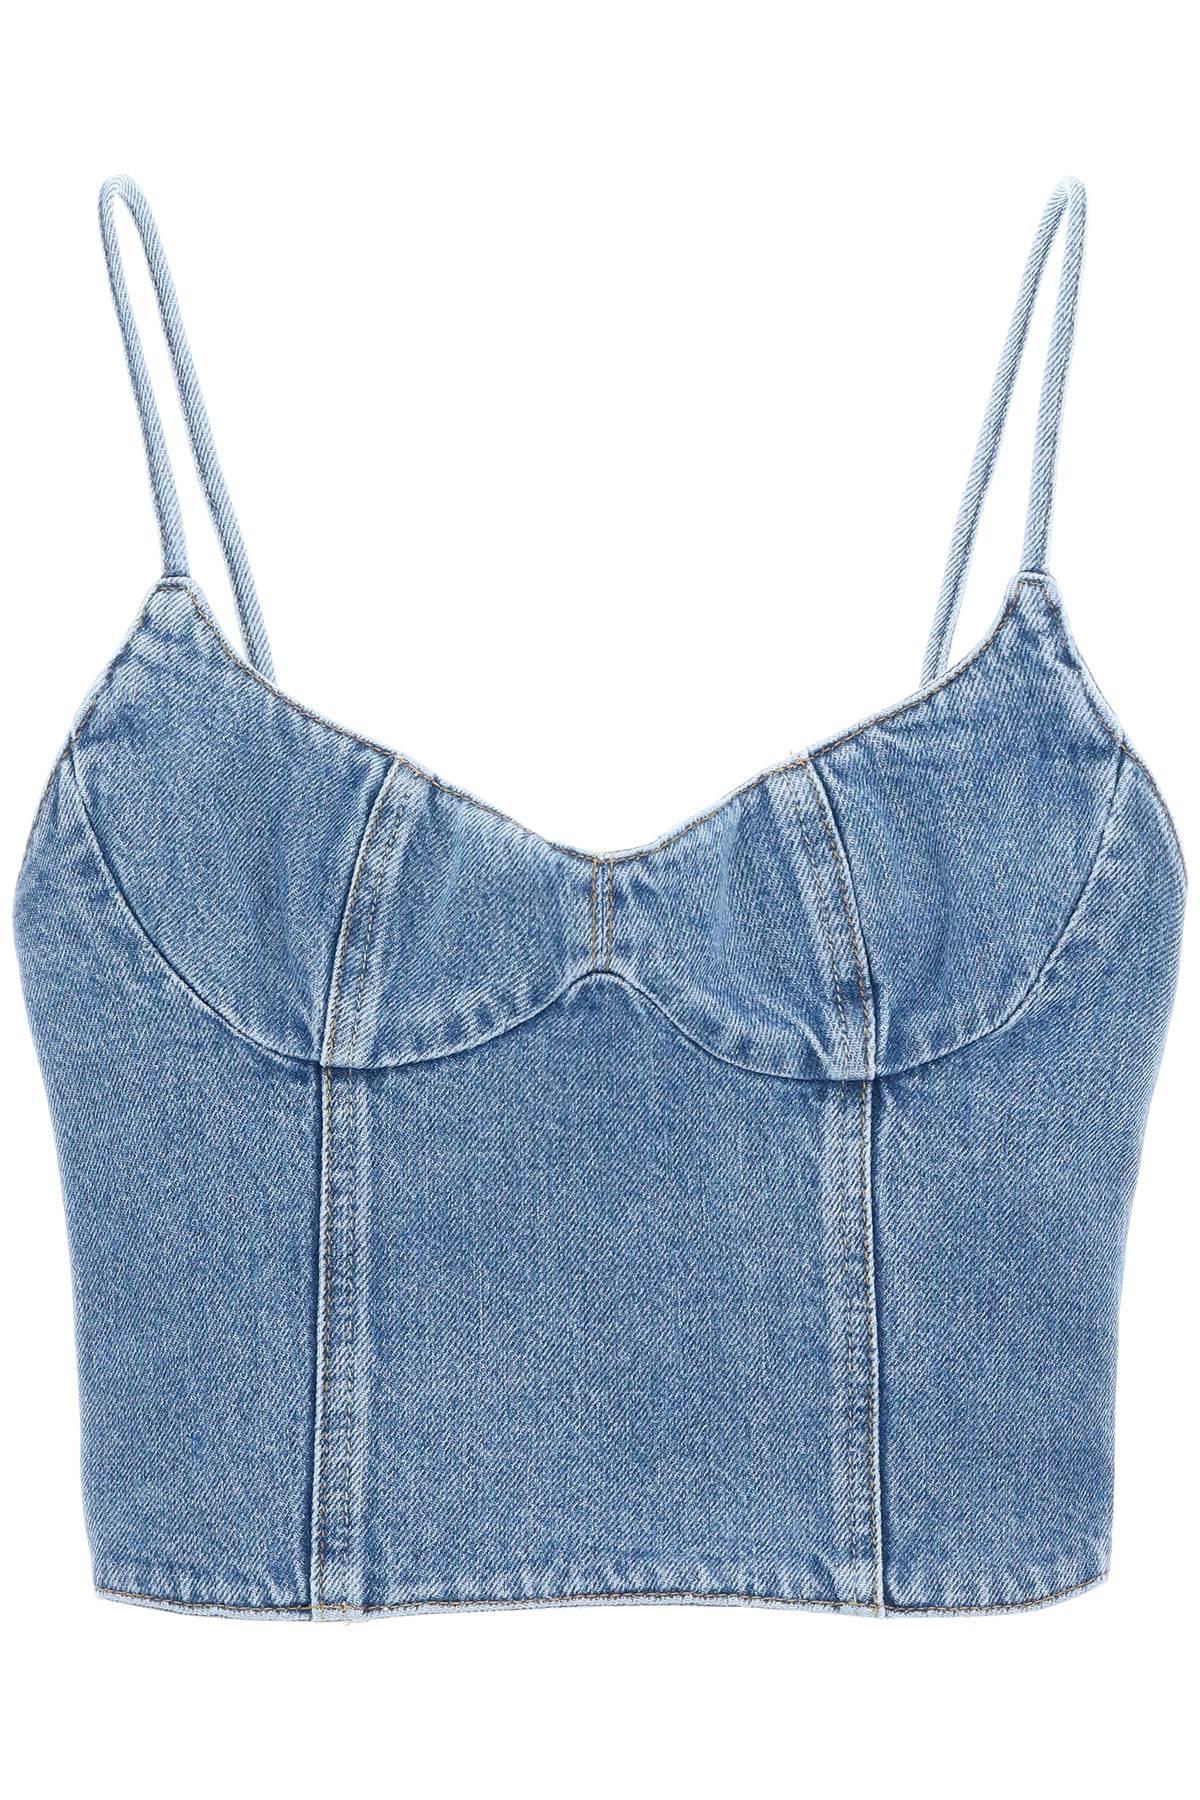 MAGDA BUTRYM Denim Cropped Bustier Top in Light Blue - SS24 Collection